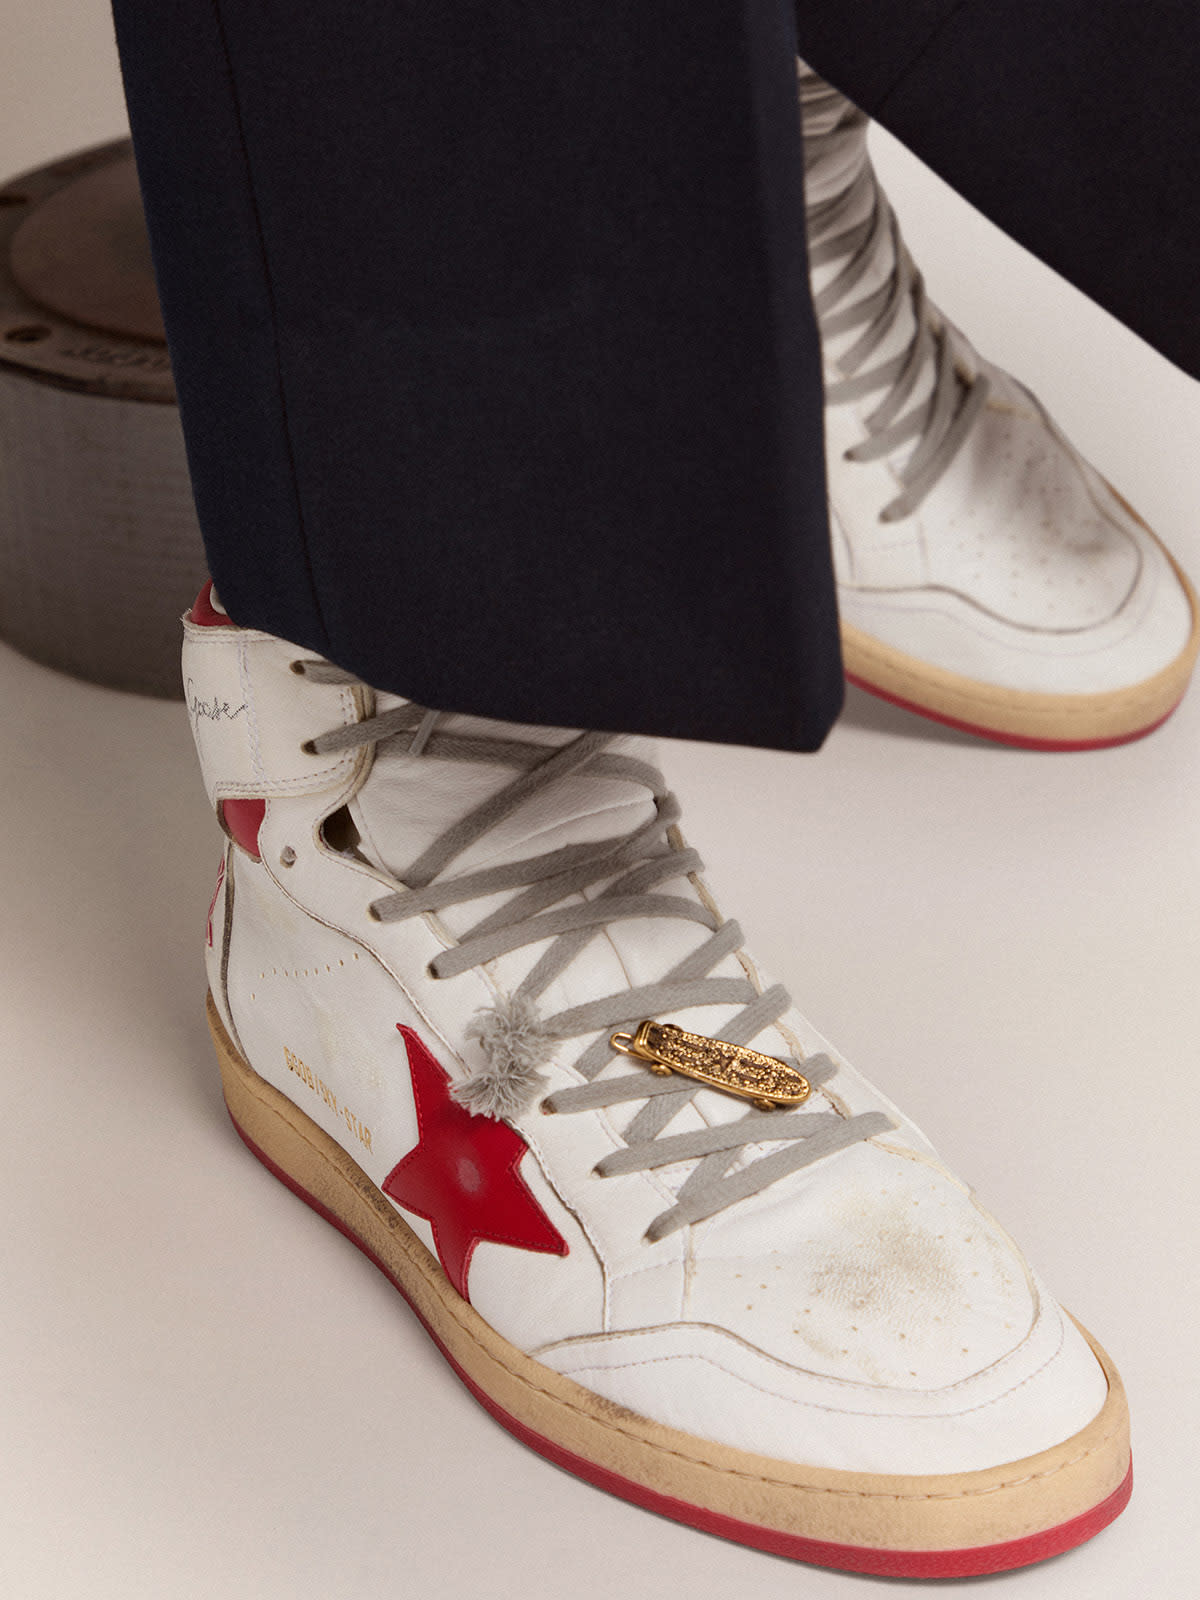 Golden Goose - Men's lace accessory in old gold color in the shape of a skateboard in 